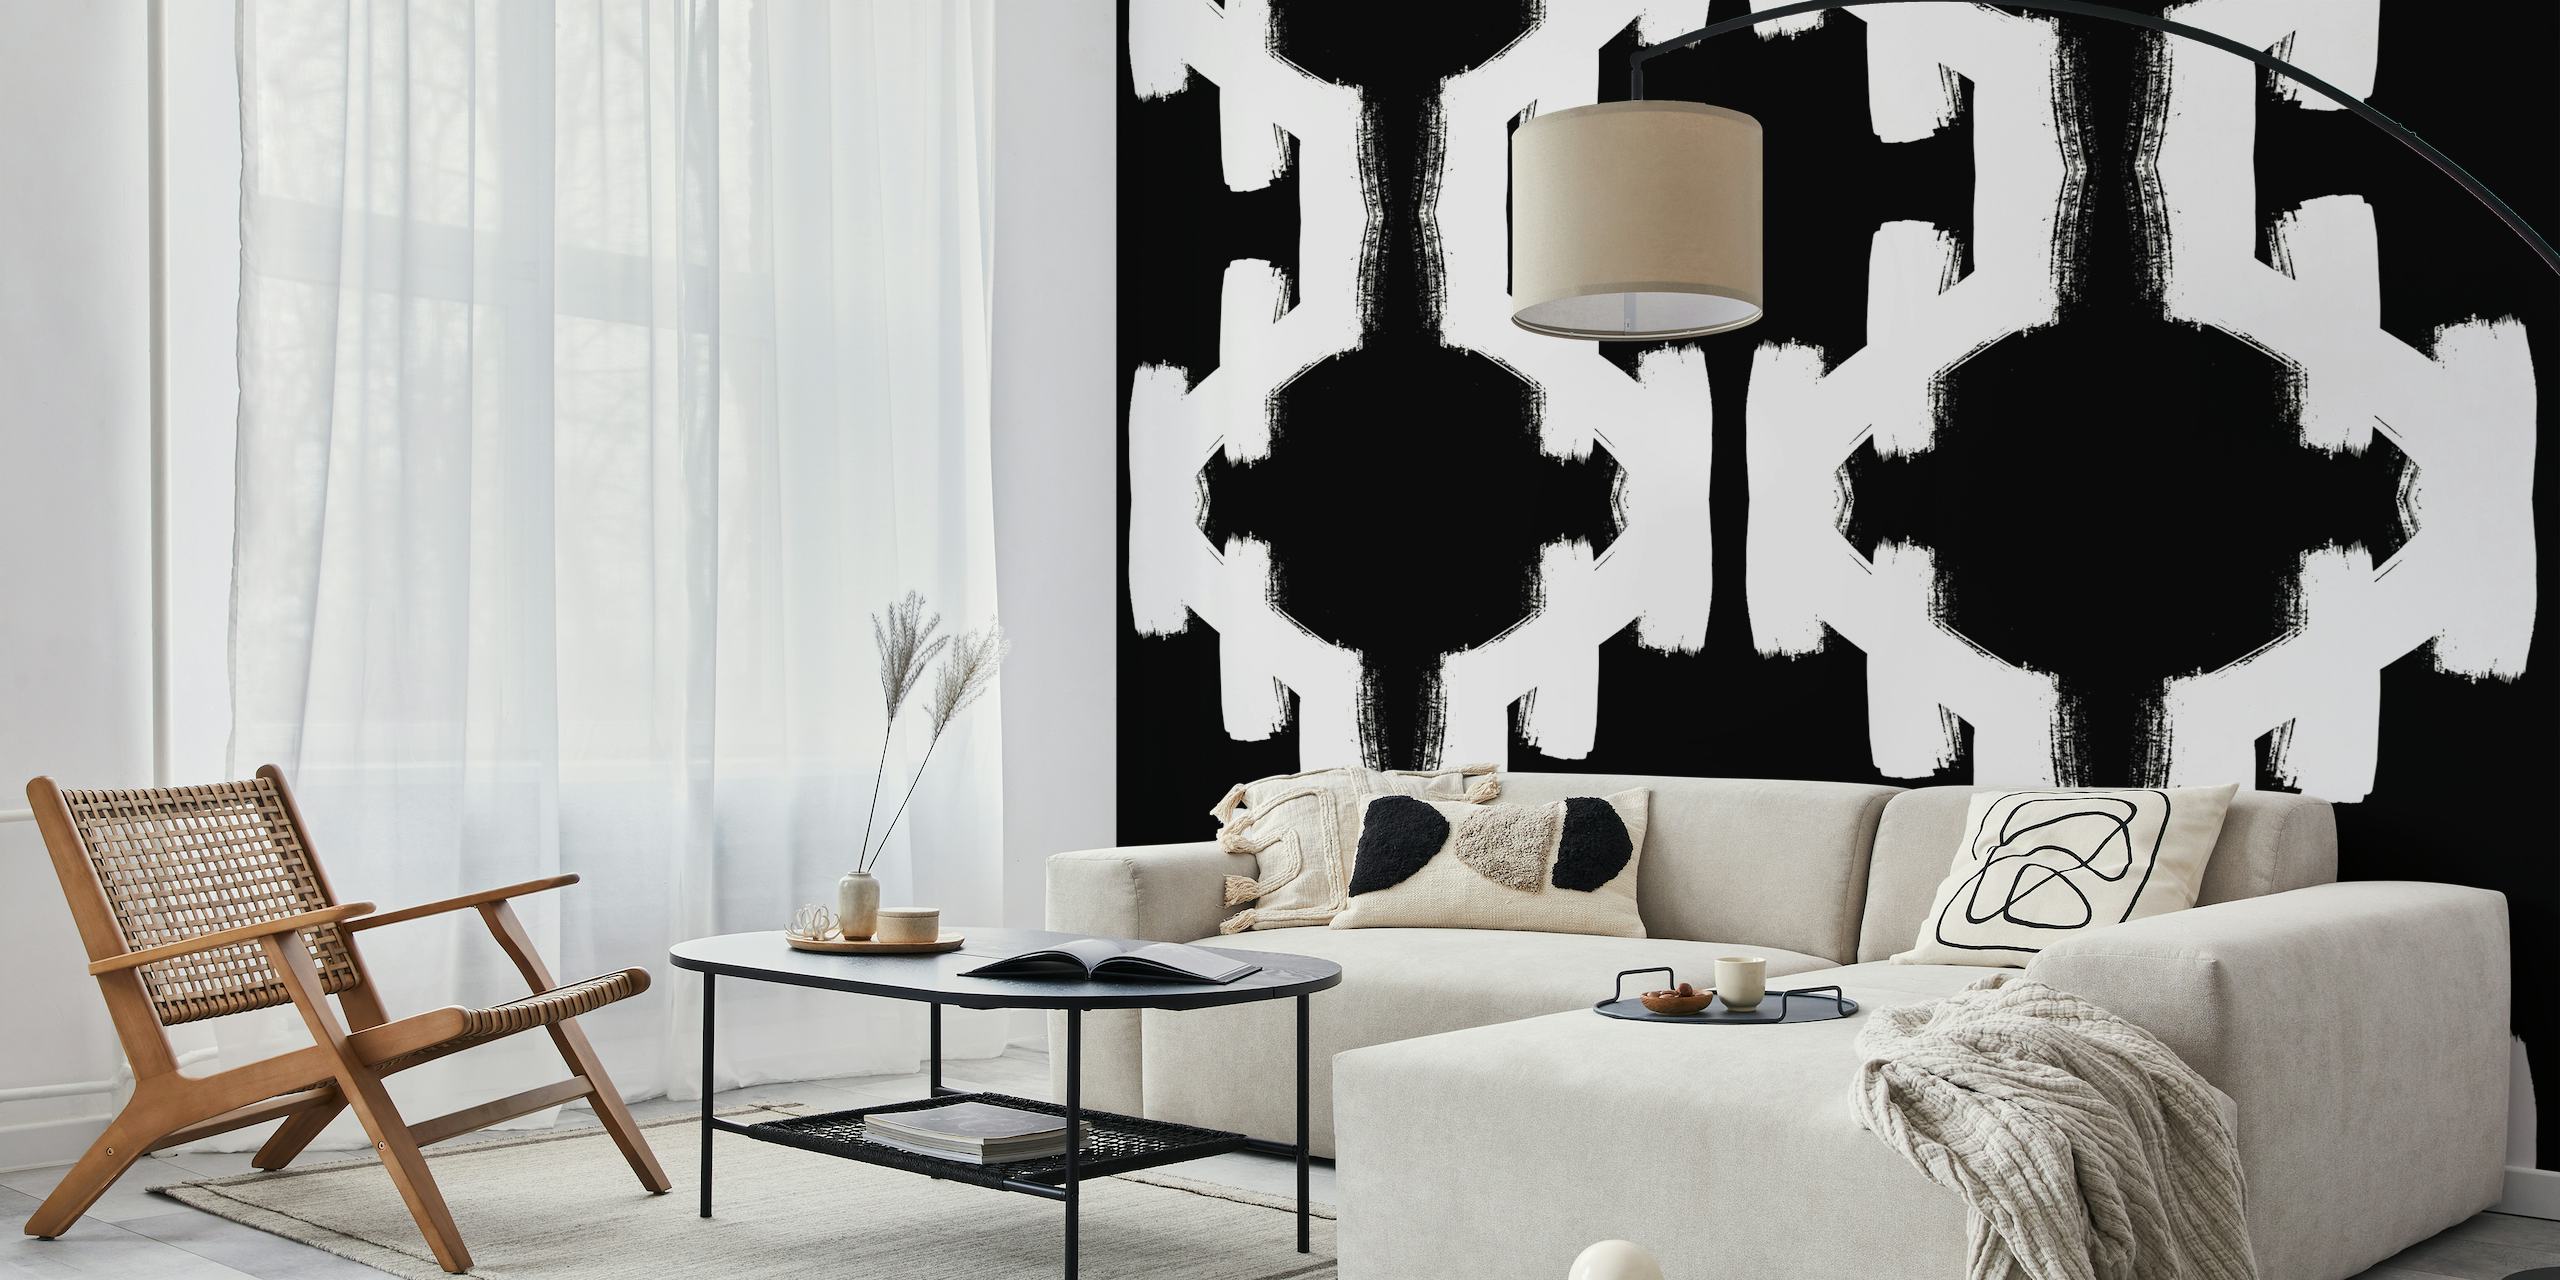 Black and white abstract geometric pattern wall mural for contemporary interior design